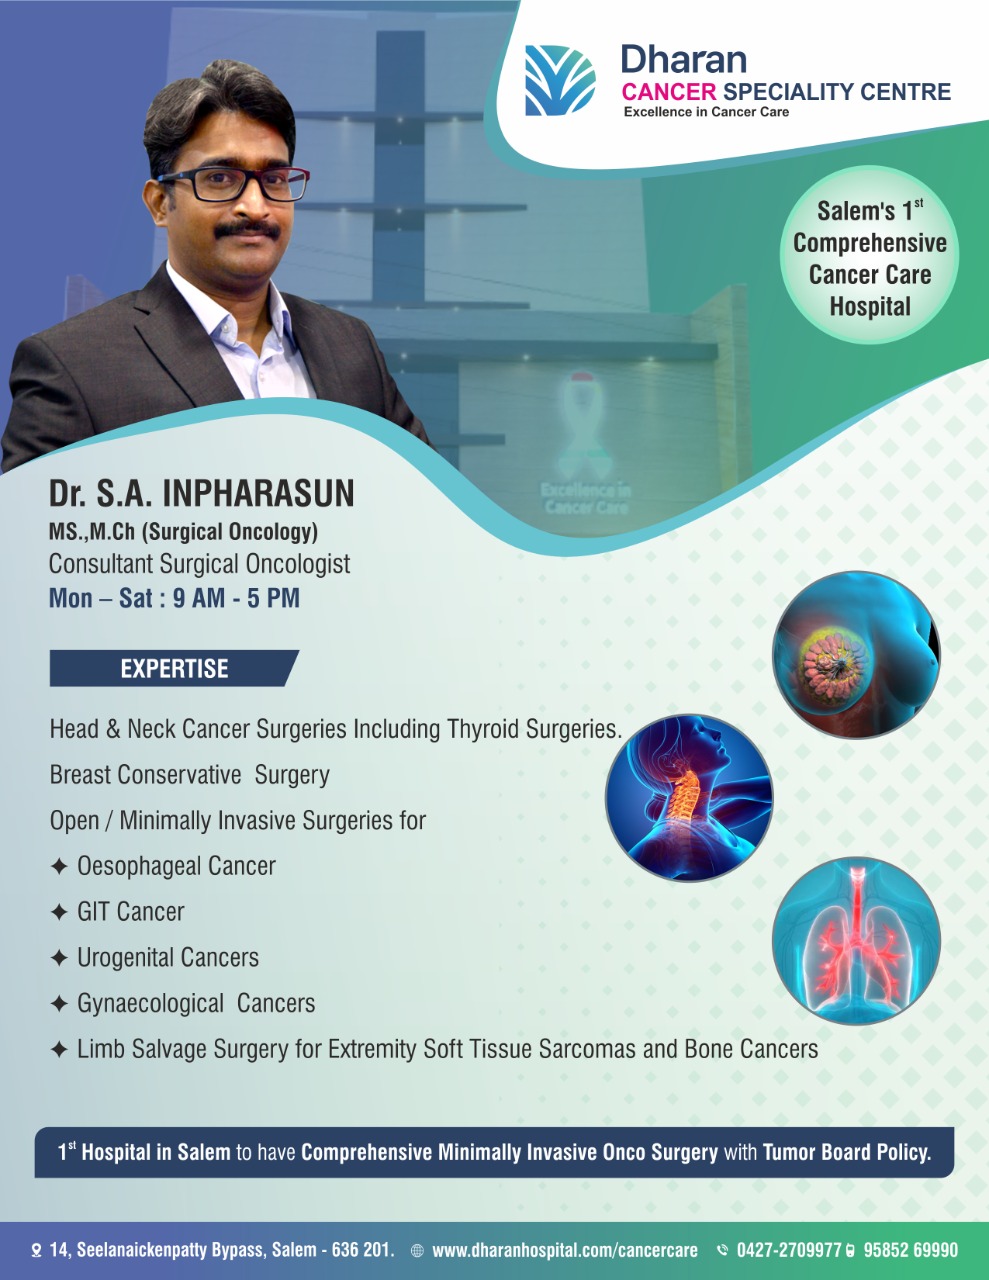 Dr. S.A. Inpharasun | Dharan Cancer Speciality Centre